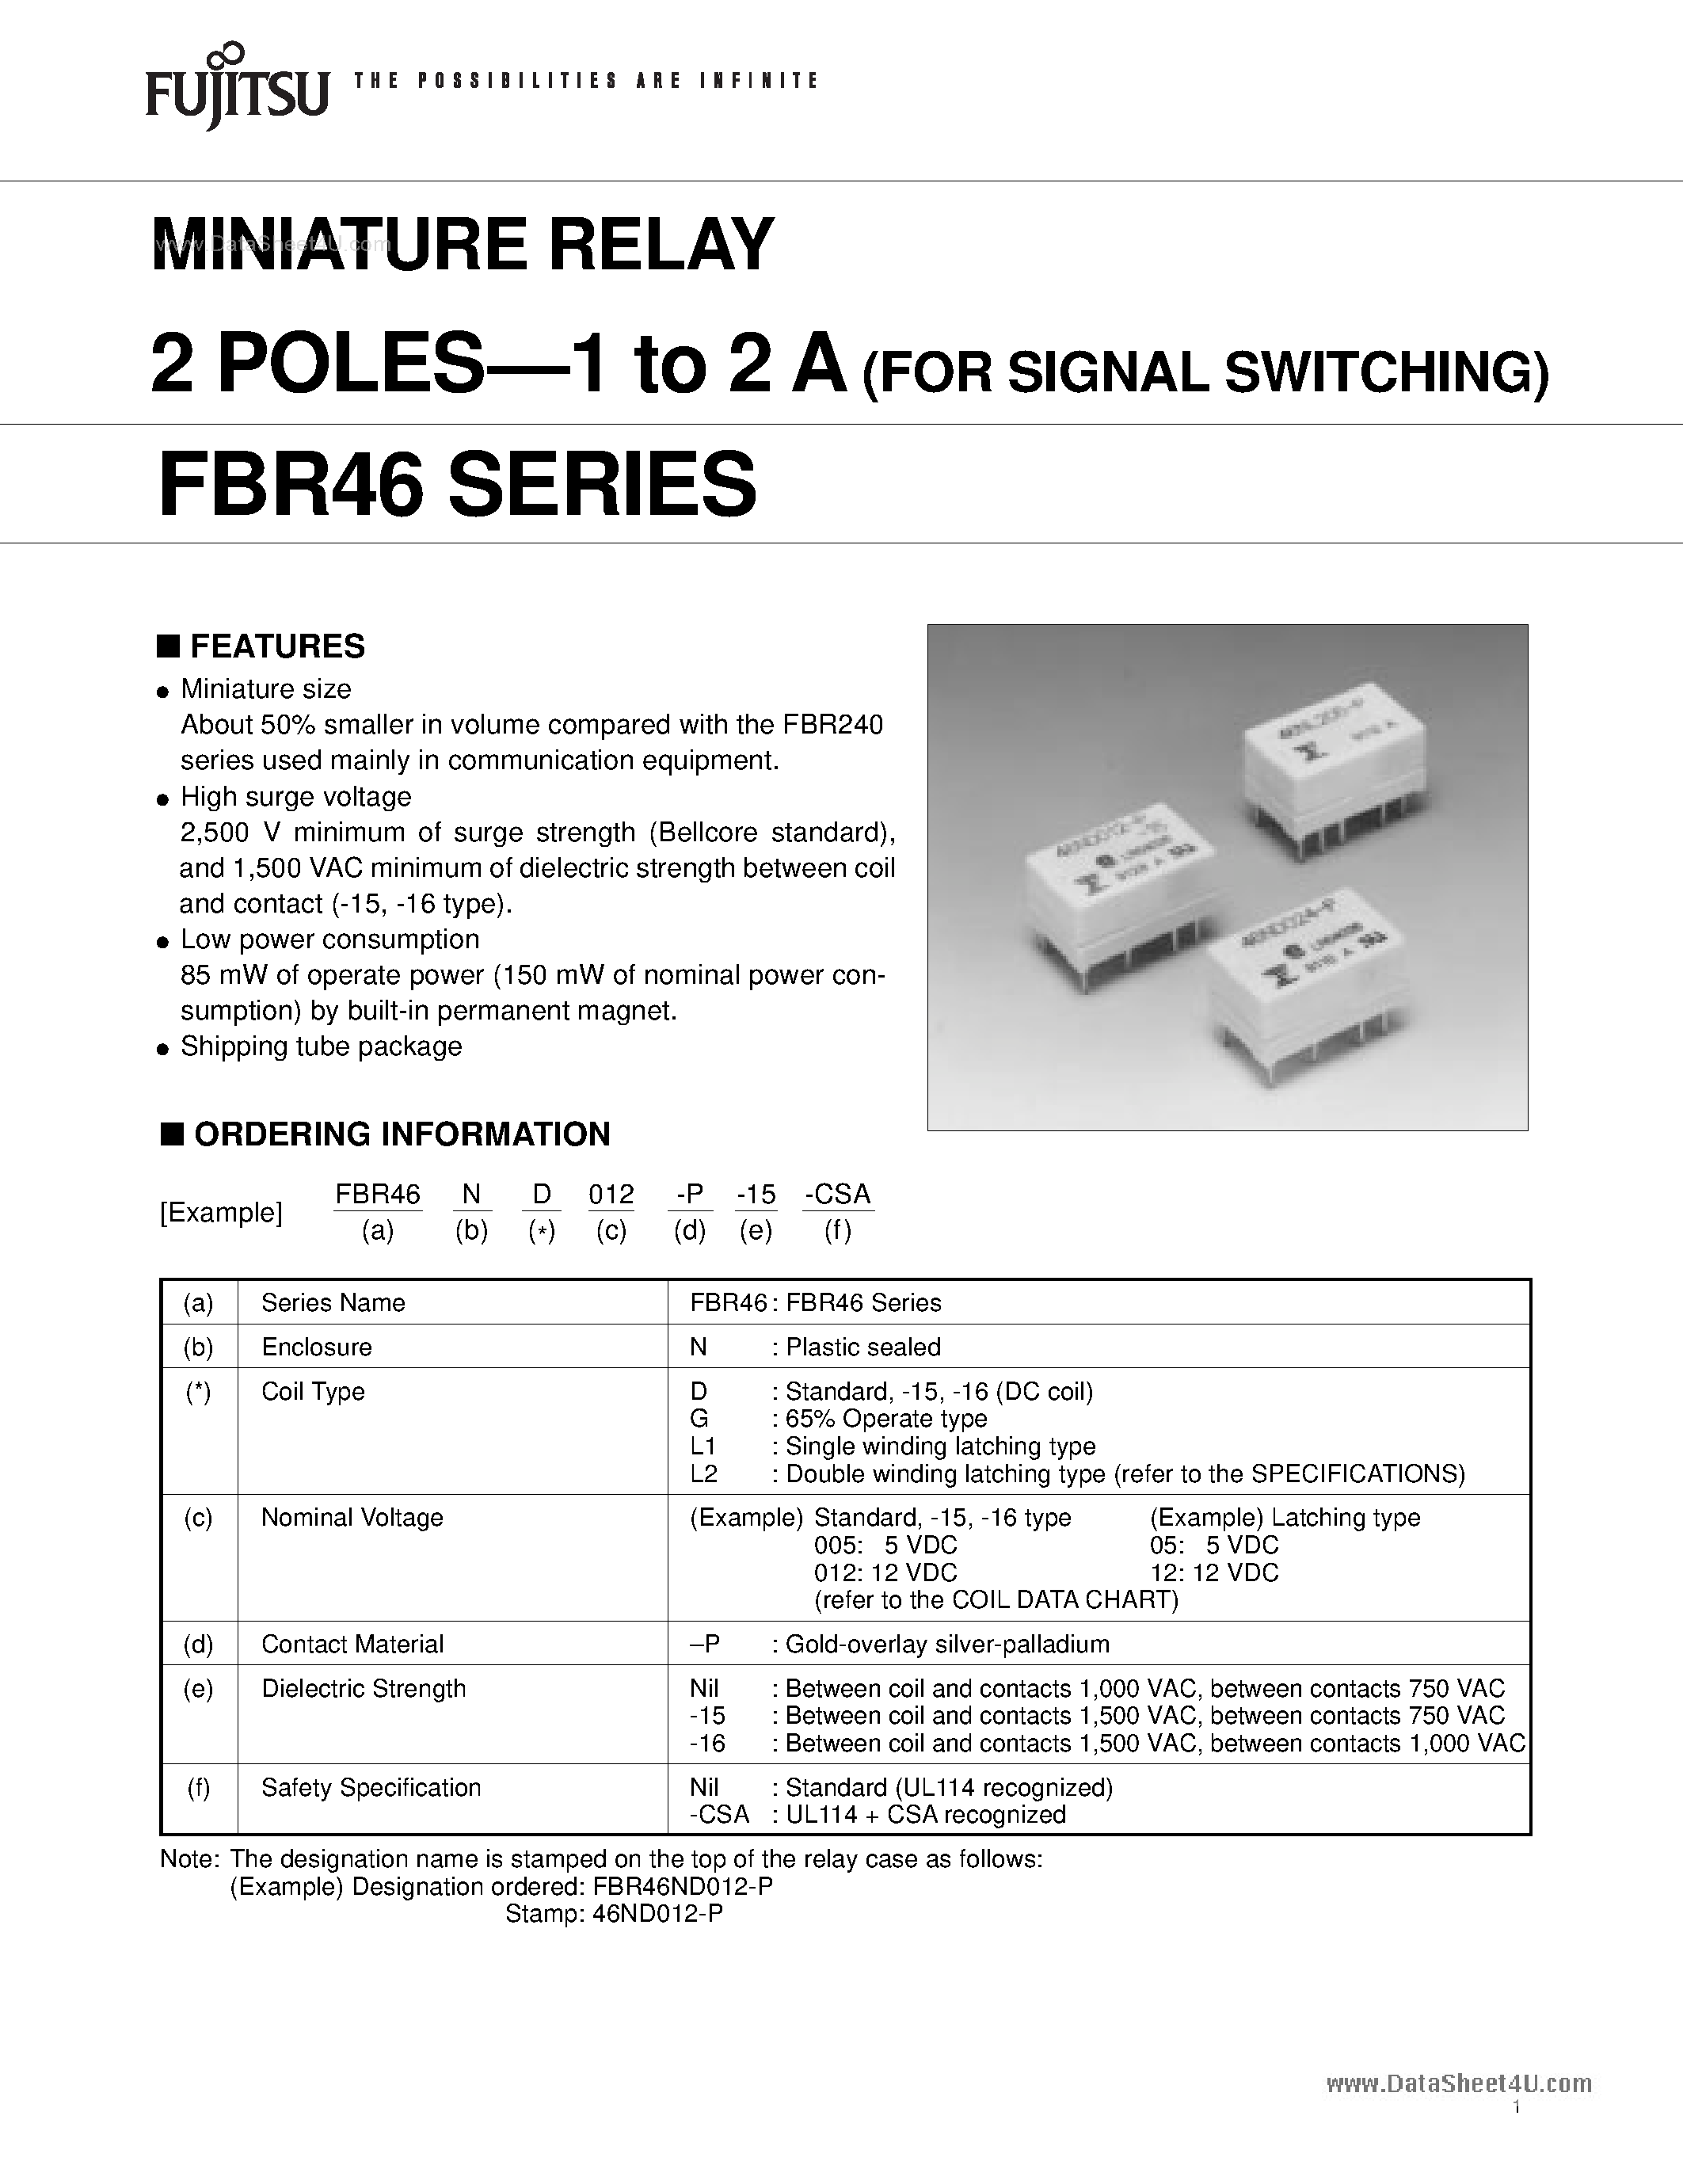 Datasheet 46ND005-P - Search -----> FBR46ND005-P page 1